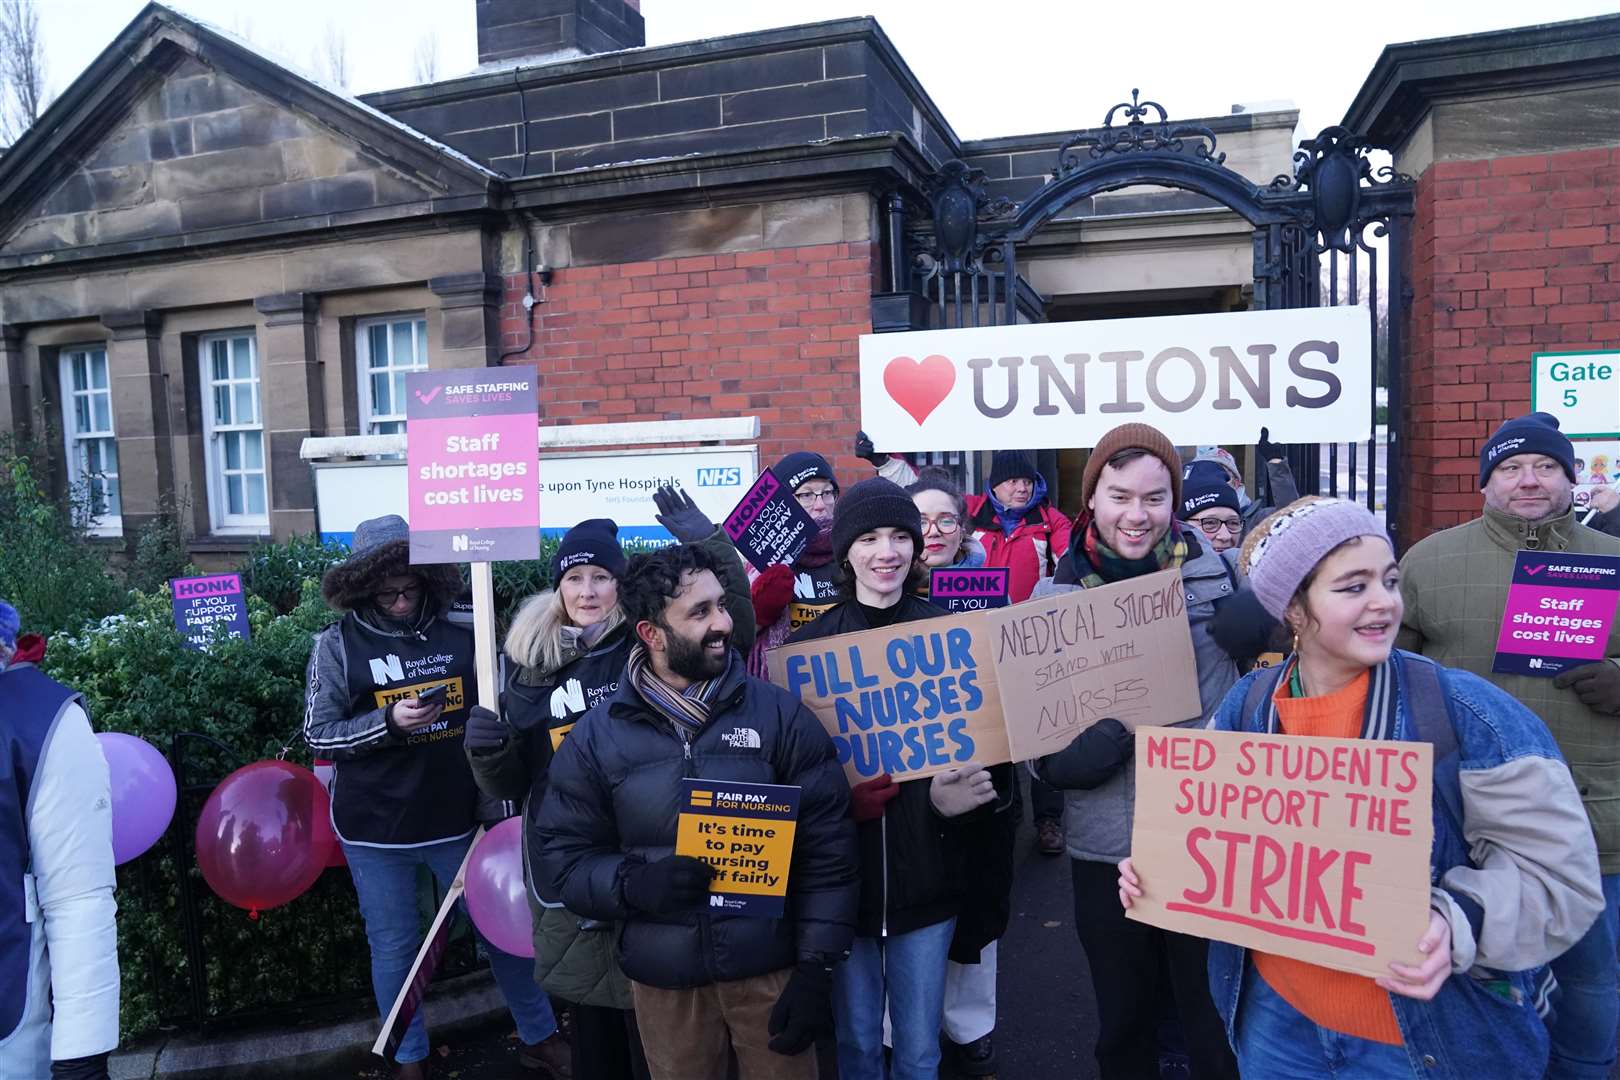 Members of the Royal College of Nursing on the picket line outside the Royal Victoria Infirmary in Newcastle (Owen Humphreys/PA)